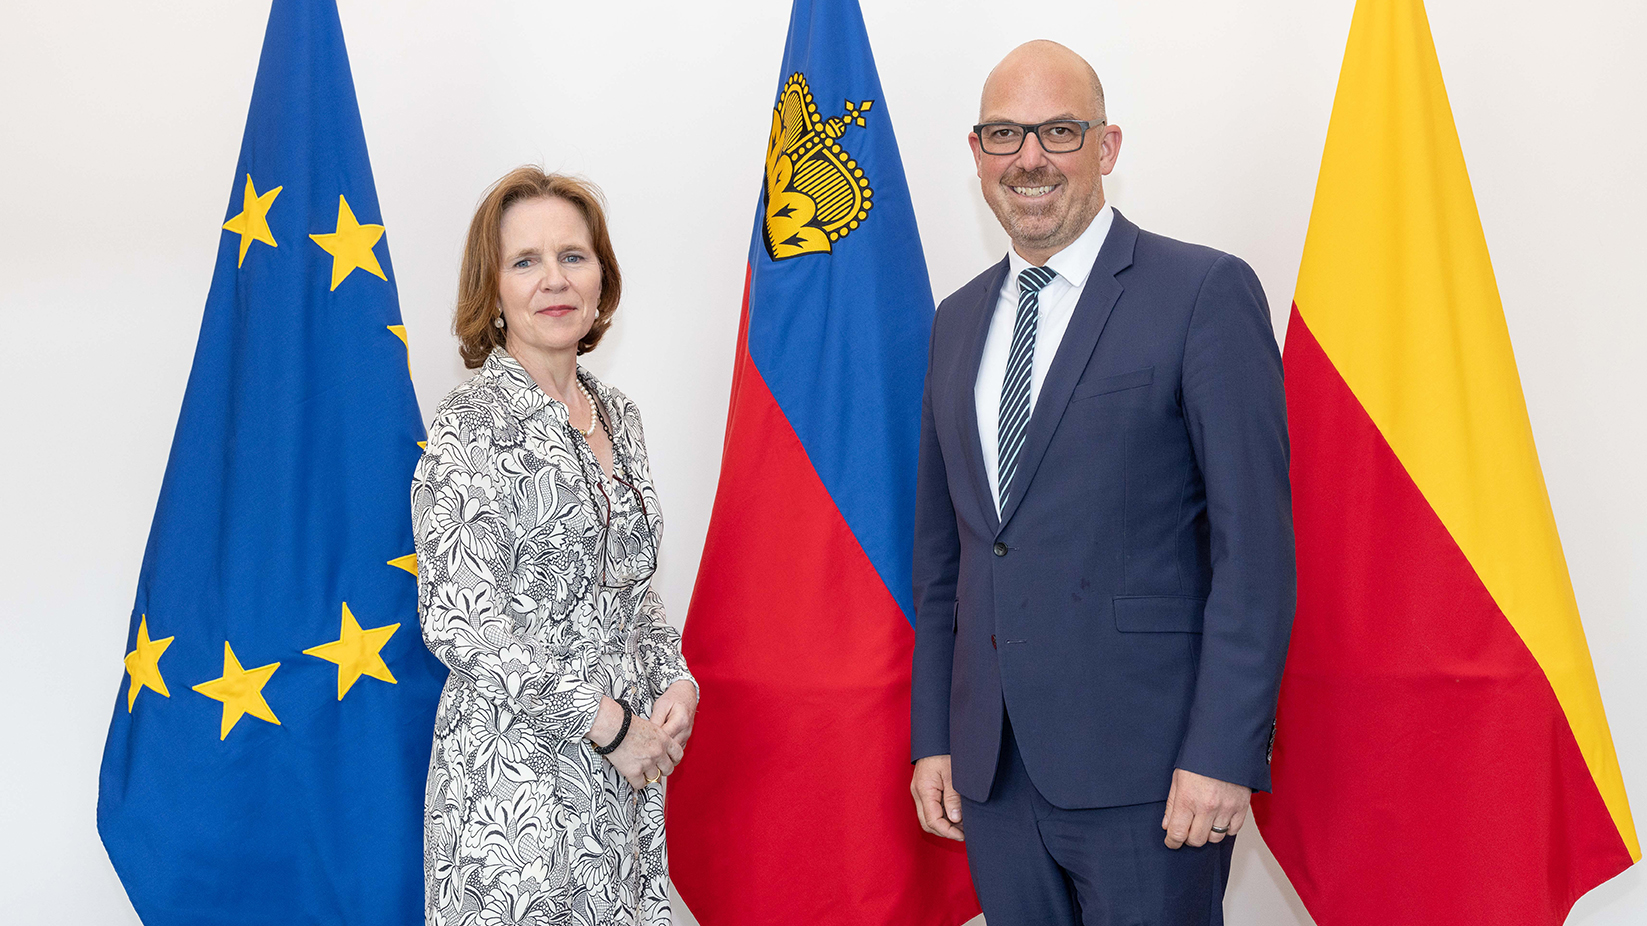 President Síofra O’Leary Prime Minister of the Principality of Liechtenstein and Minister of General Government Affairs and Finance